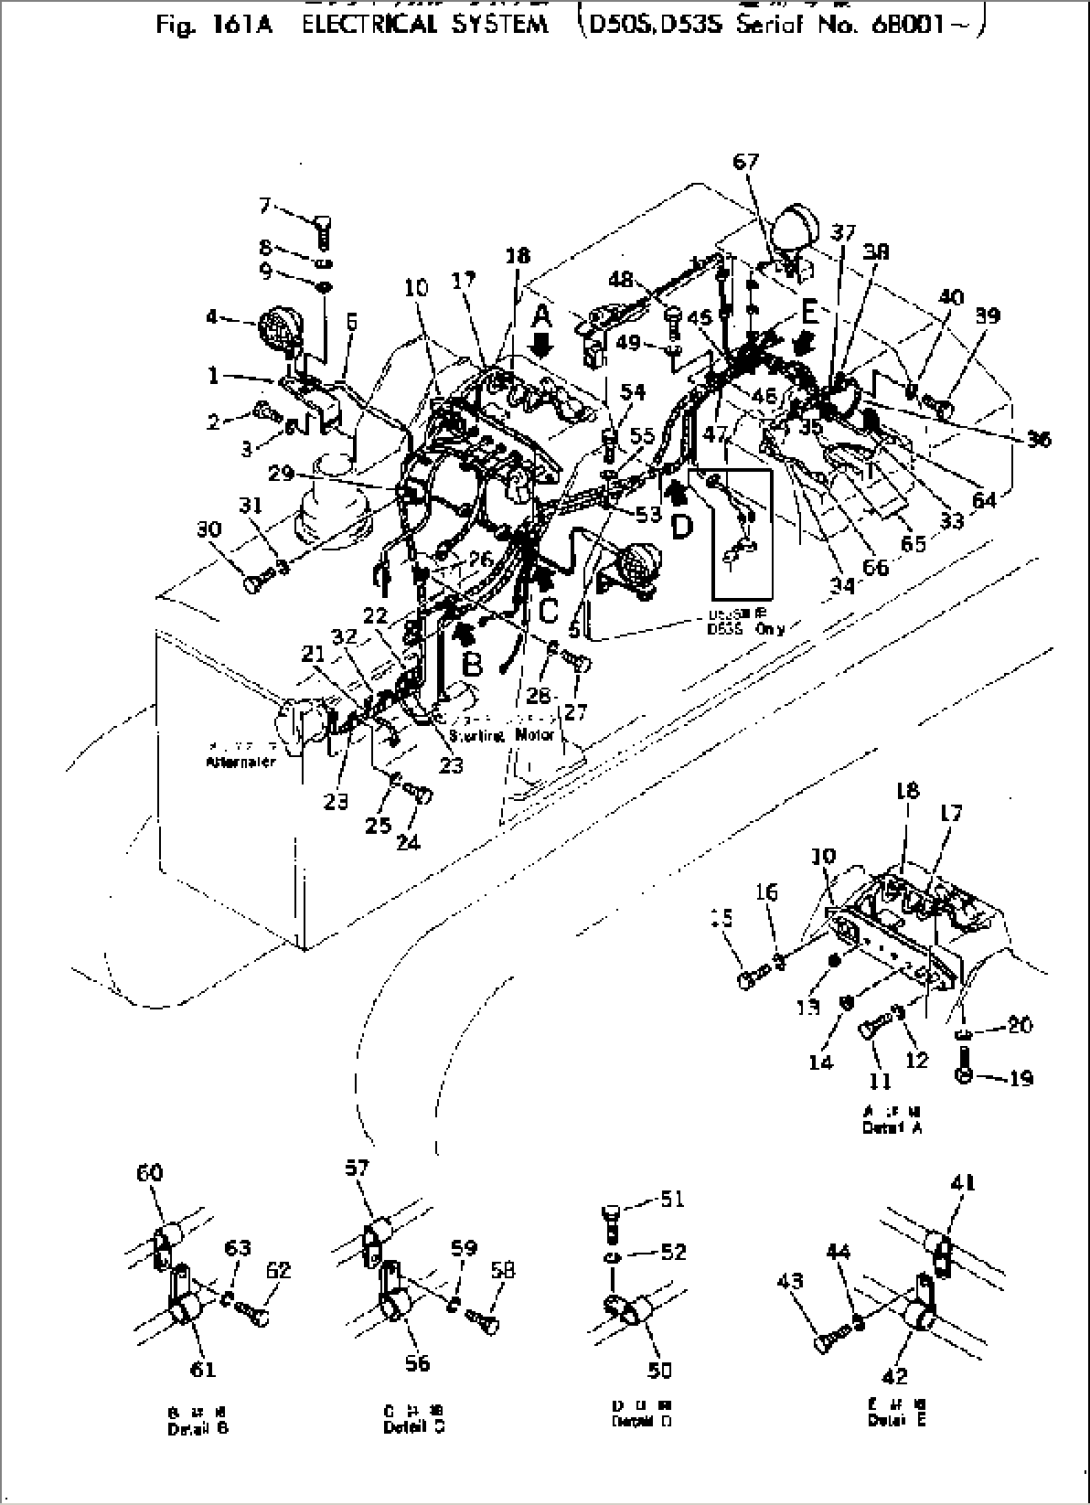 ELECTRICAL SYSTEM(#68001-)